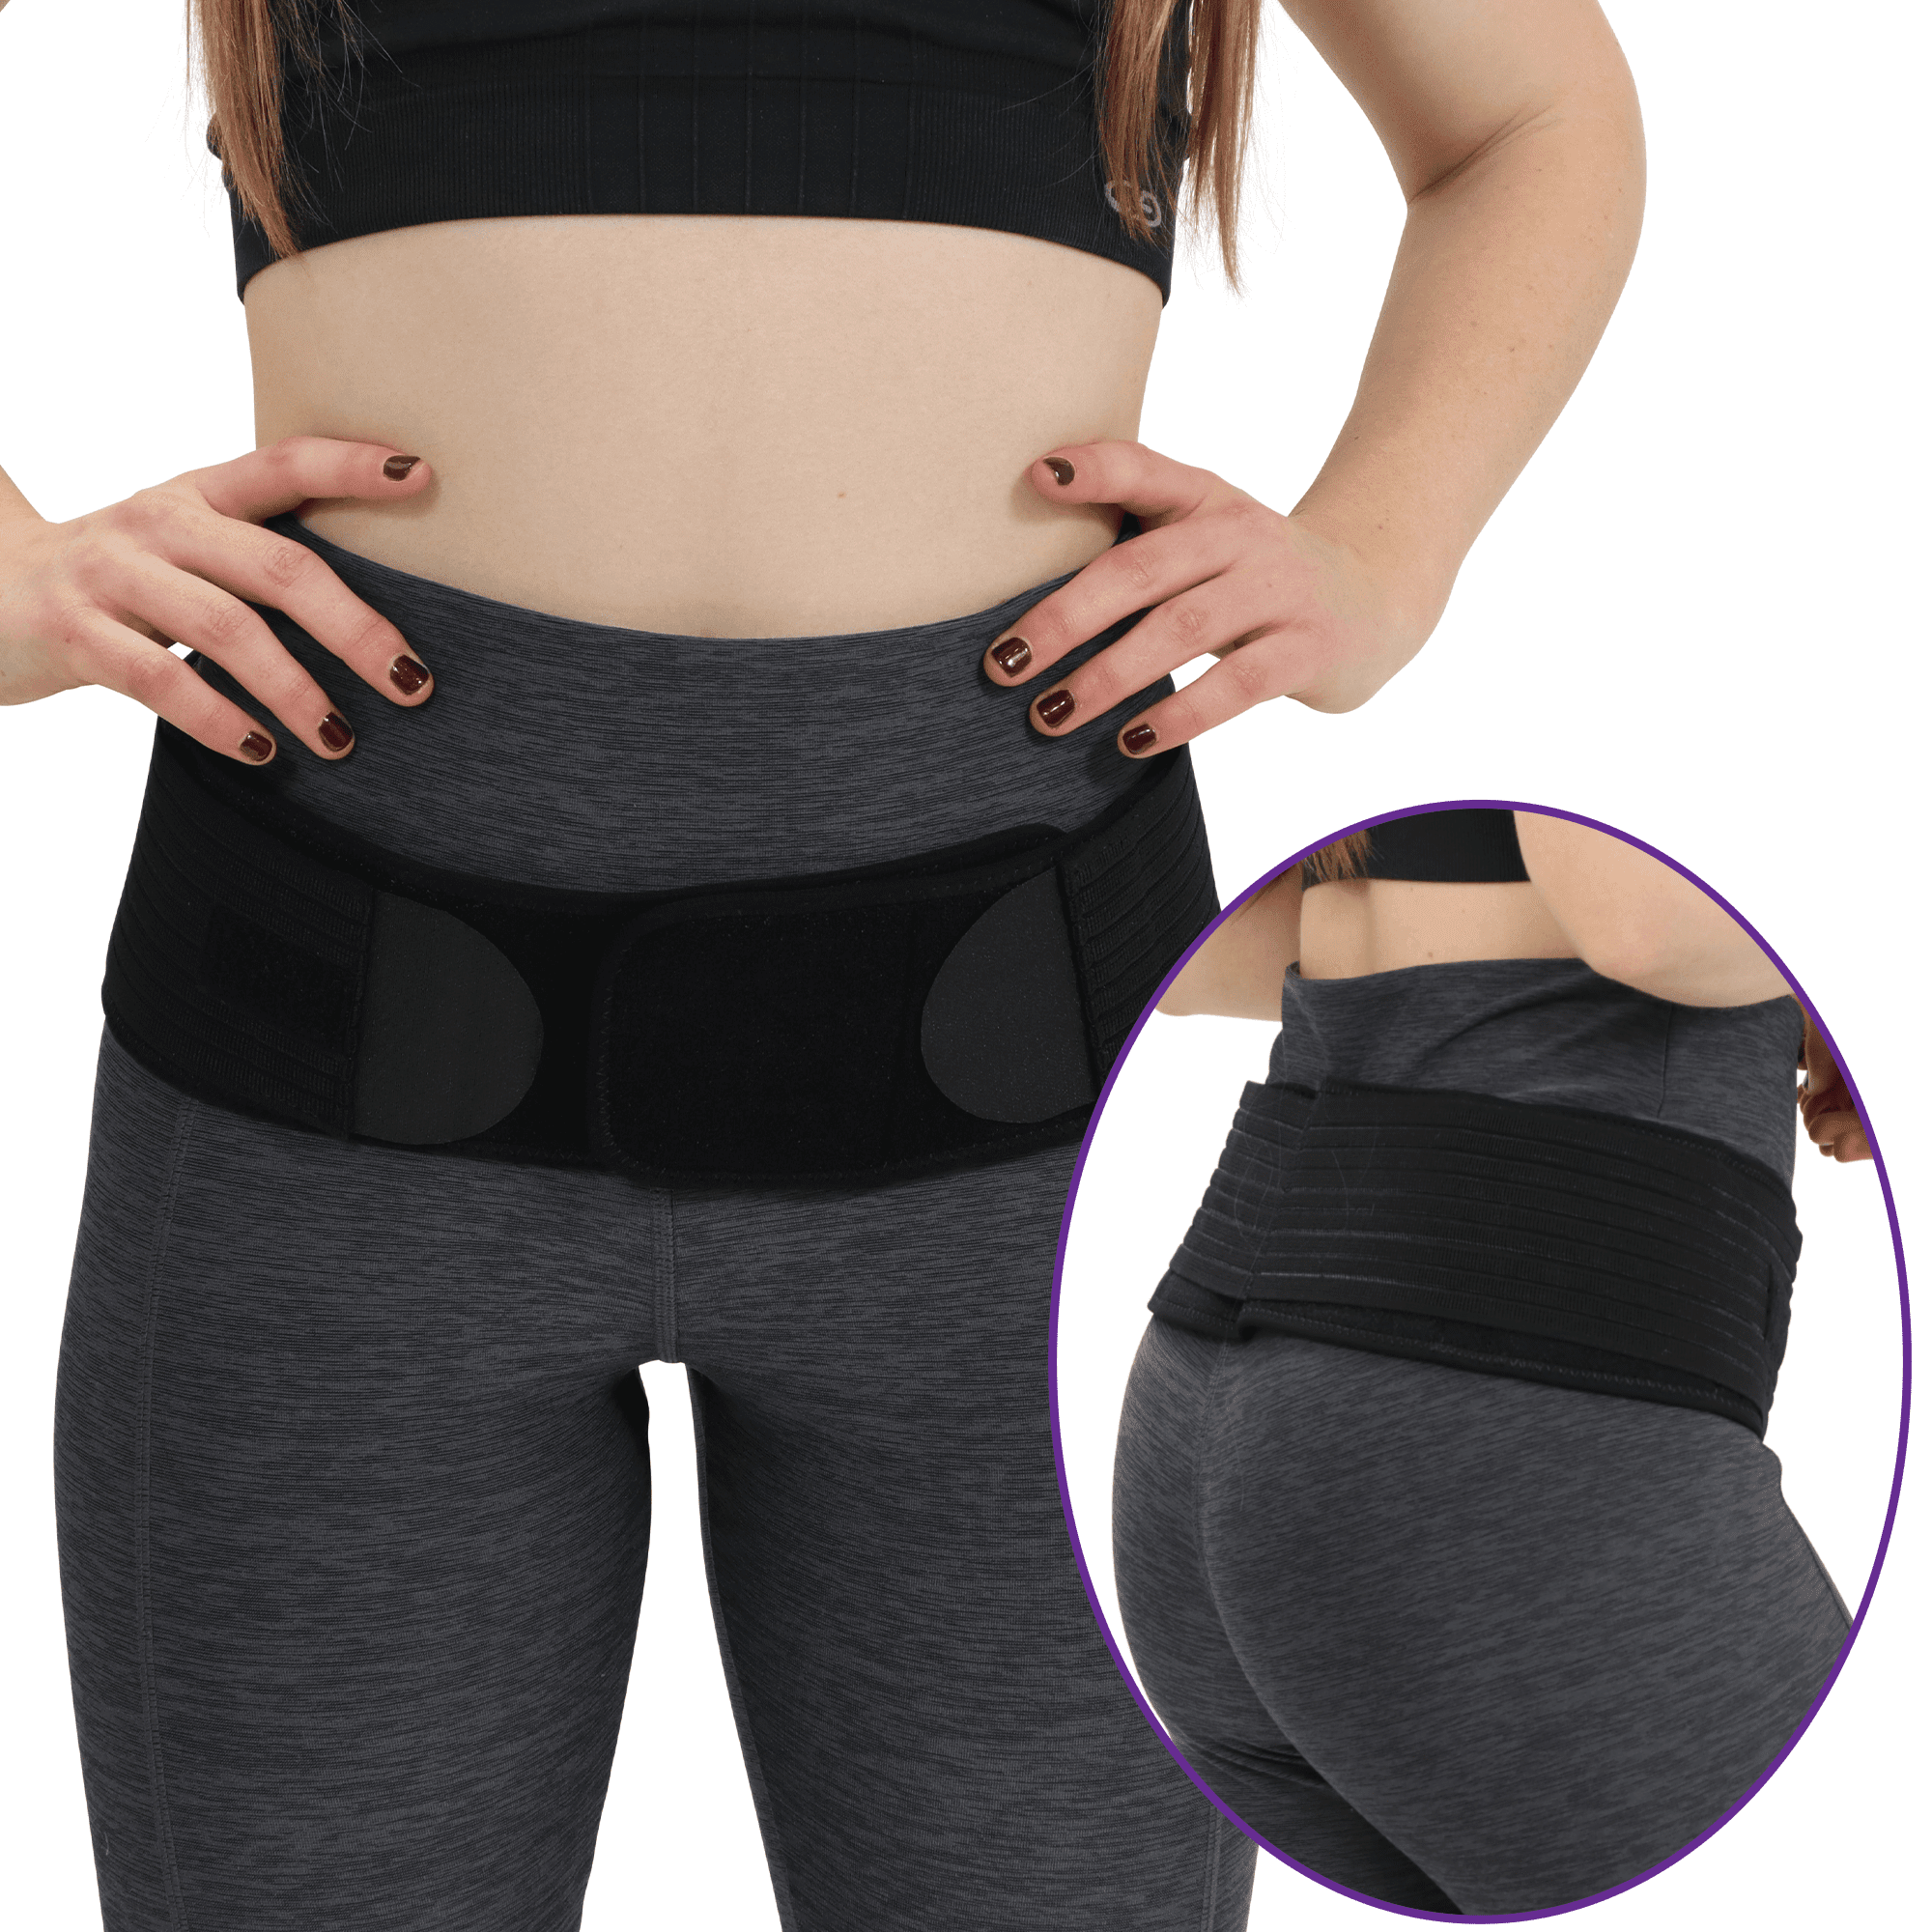 Sacroiliac Support Si Loc Hip Belt For Men And Women Posture Support